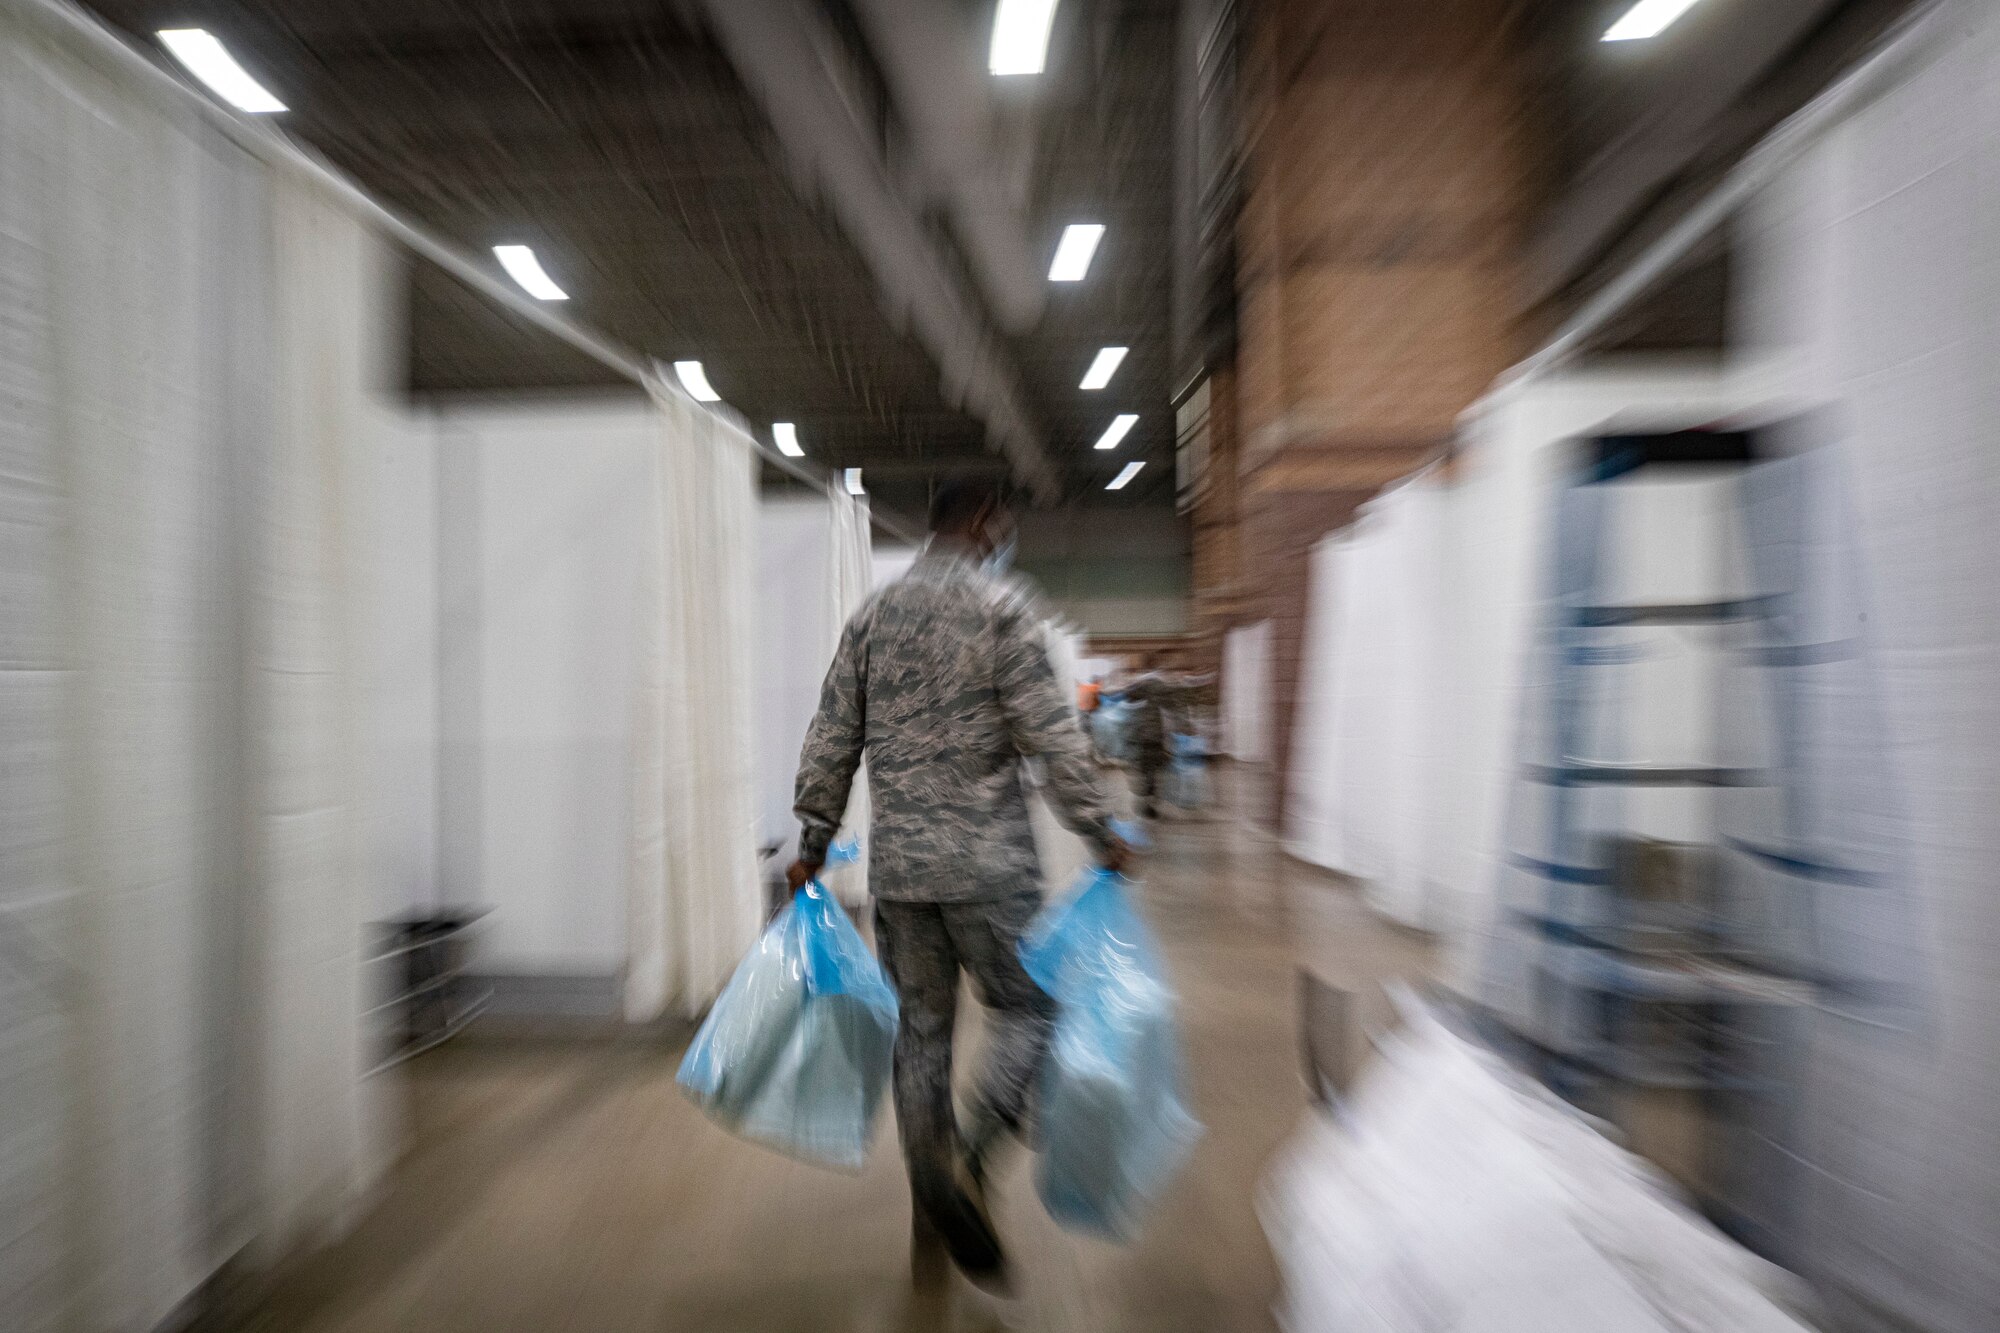 A New Jersey Air National Guard Airman carries supplies during the buildup of a Field Medical Station at the Atlantic City Convention Center in Atlantic City, N.J., April 9, 2020.  Atlantic City is one of three stations that will offer overflow from local hospitals focused on COVID-19 patients. (U.S. Air National Guard photo by Master Sgt. Matt Hecht)